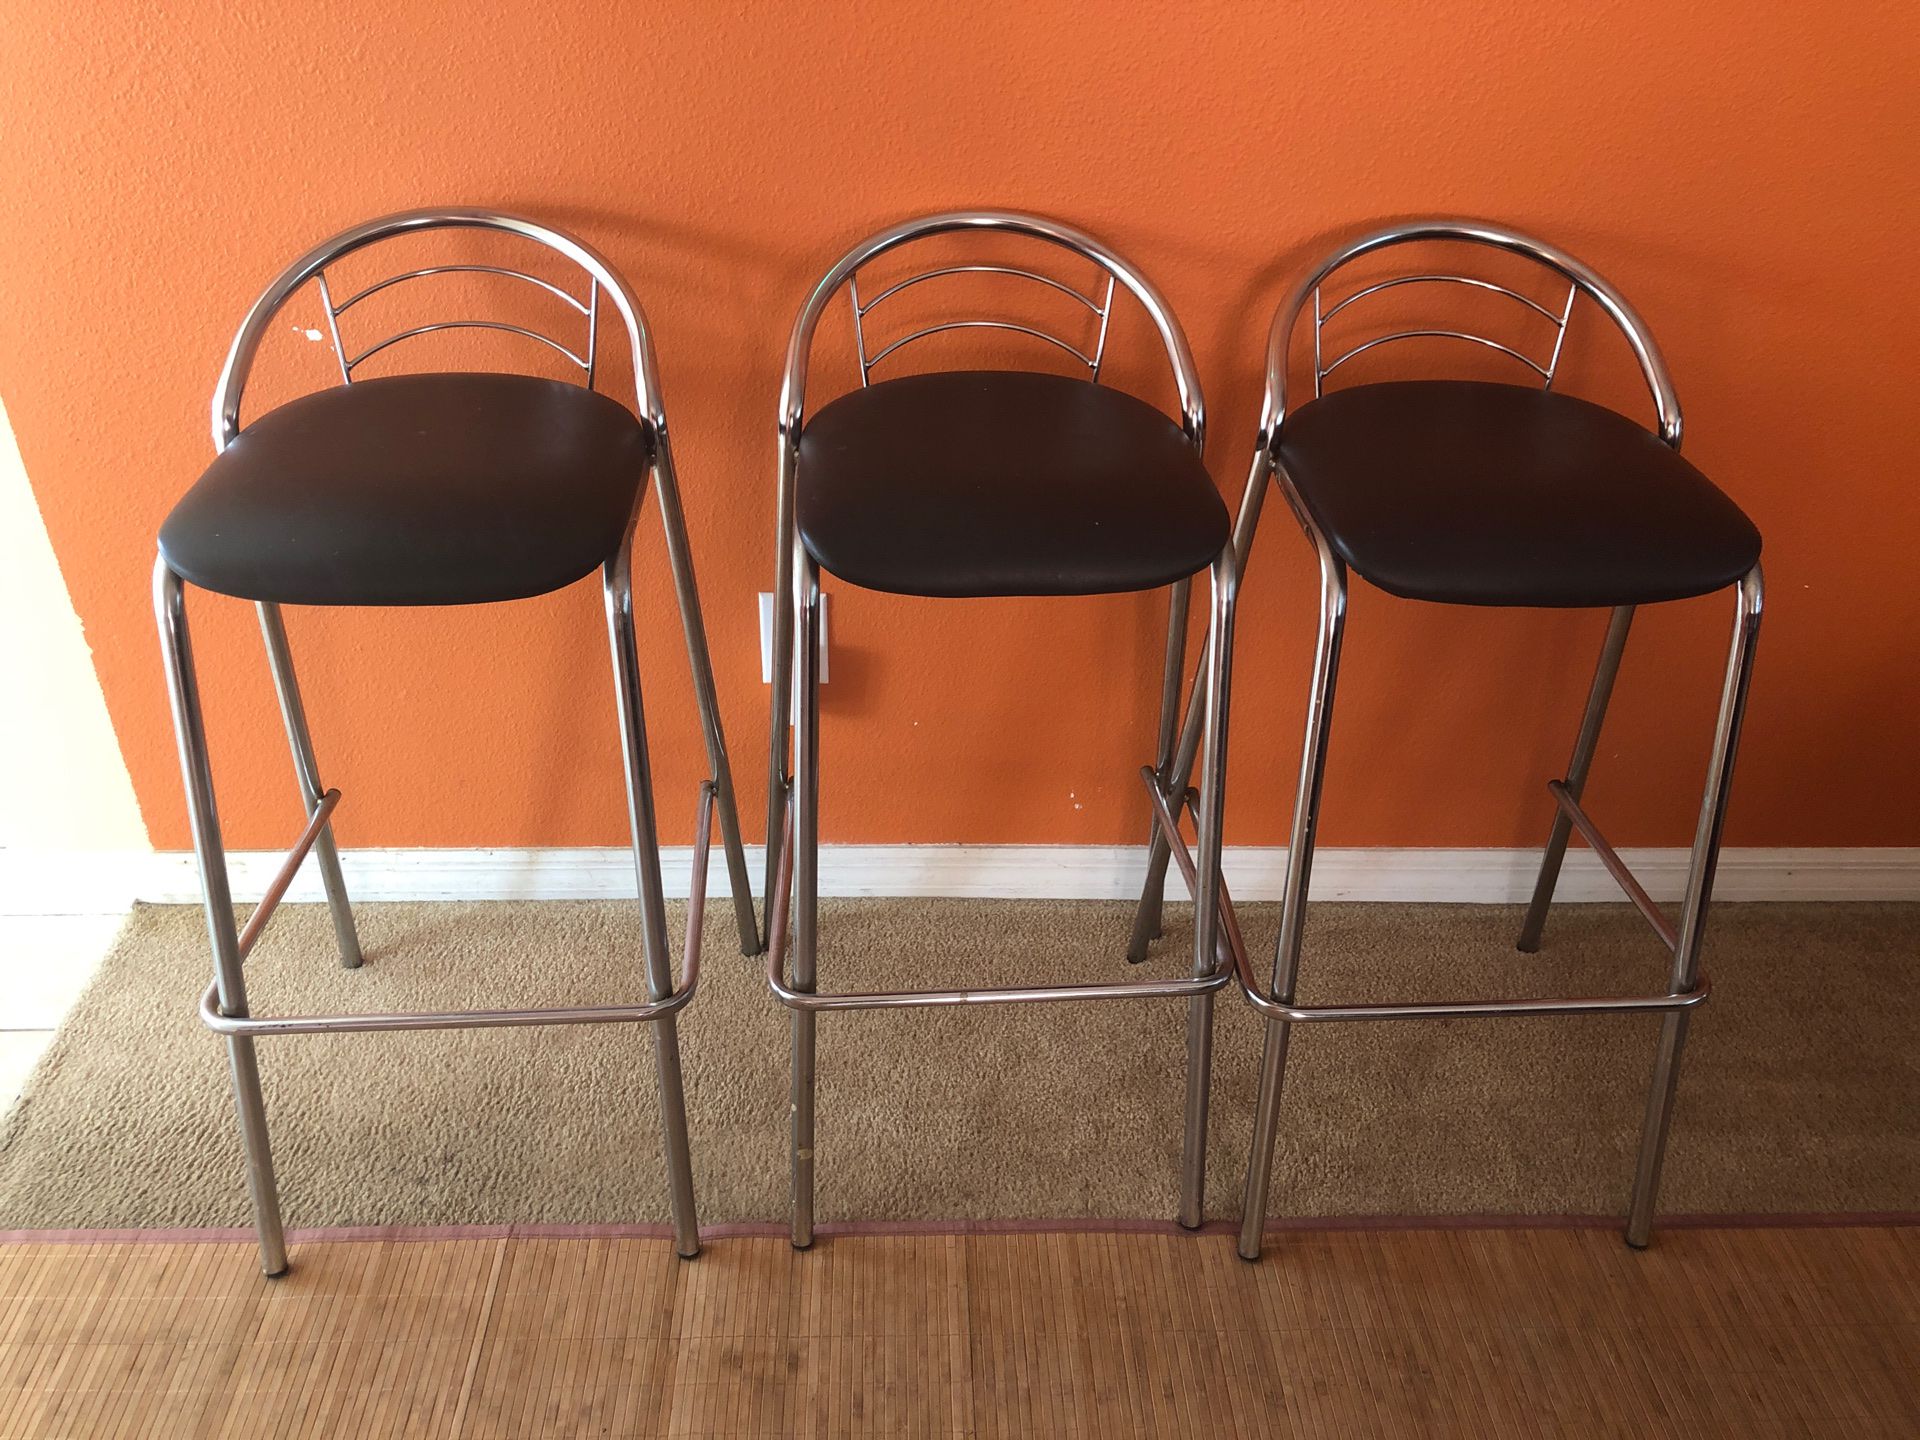 3 Used Bar stools for SAle